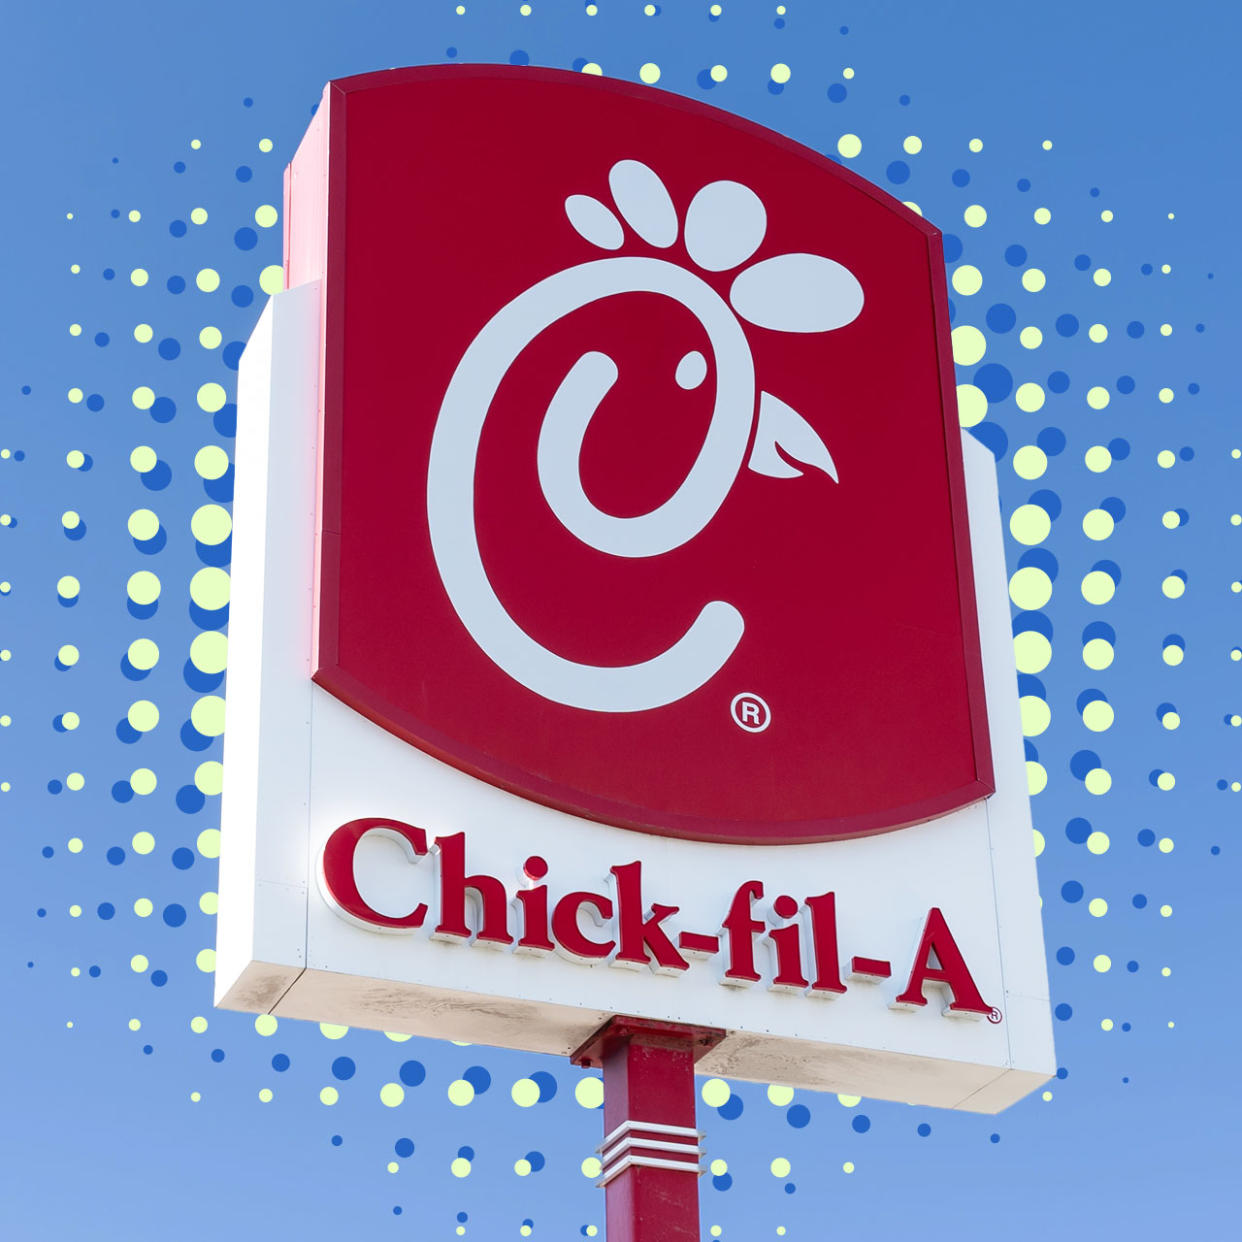 chick fil a sign with background burst